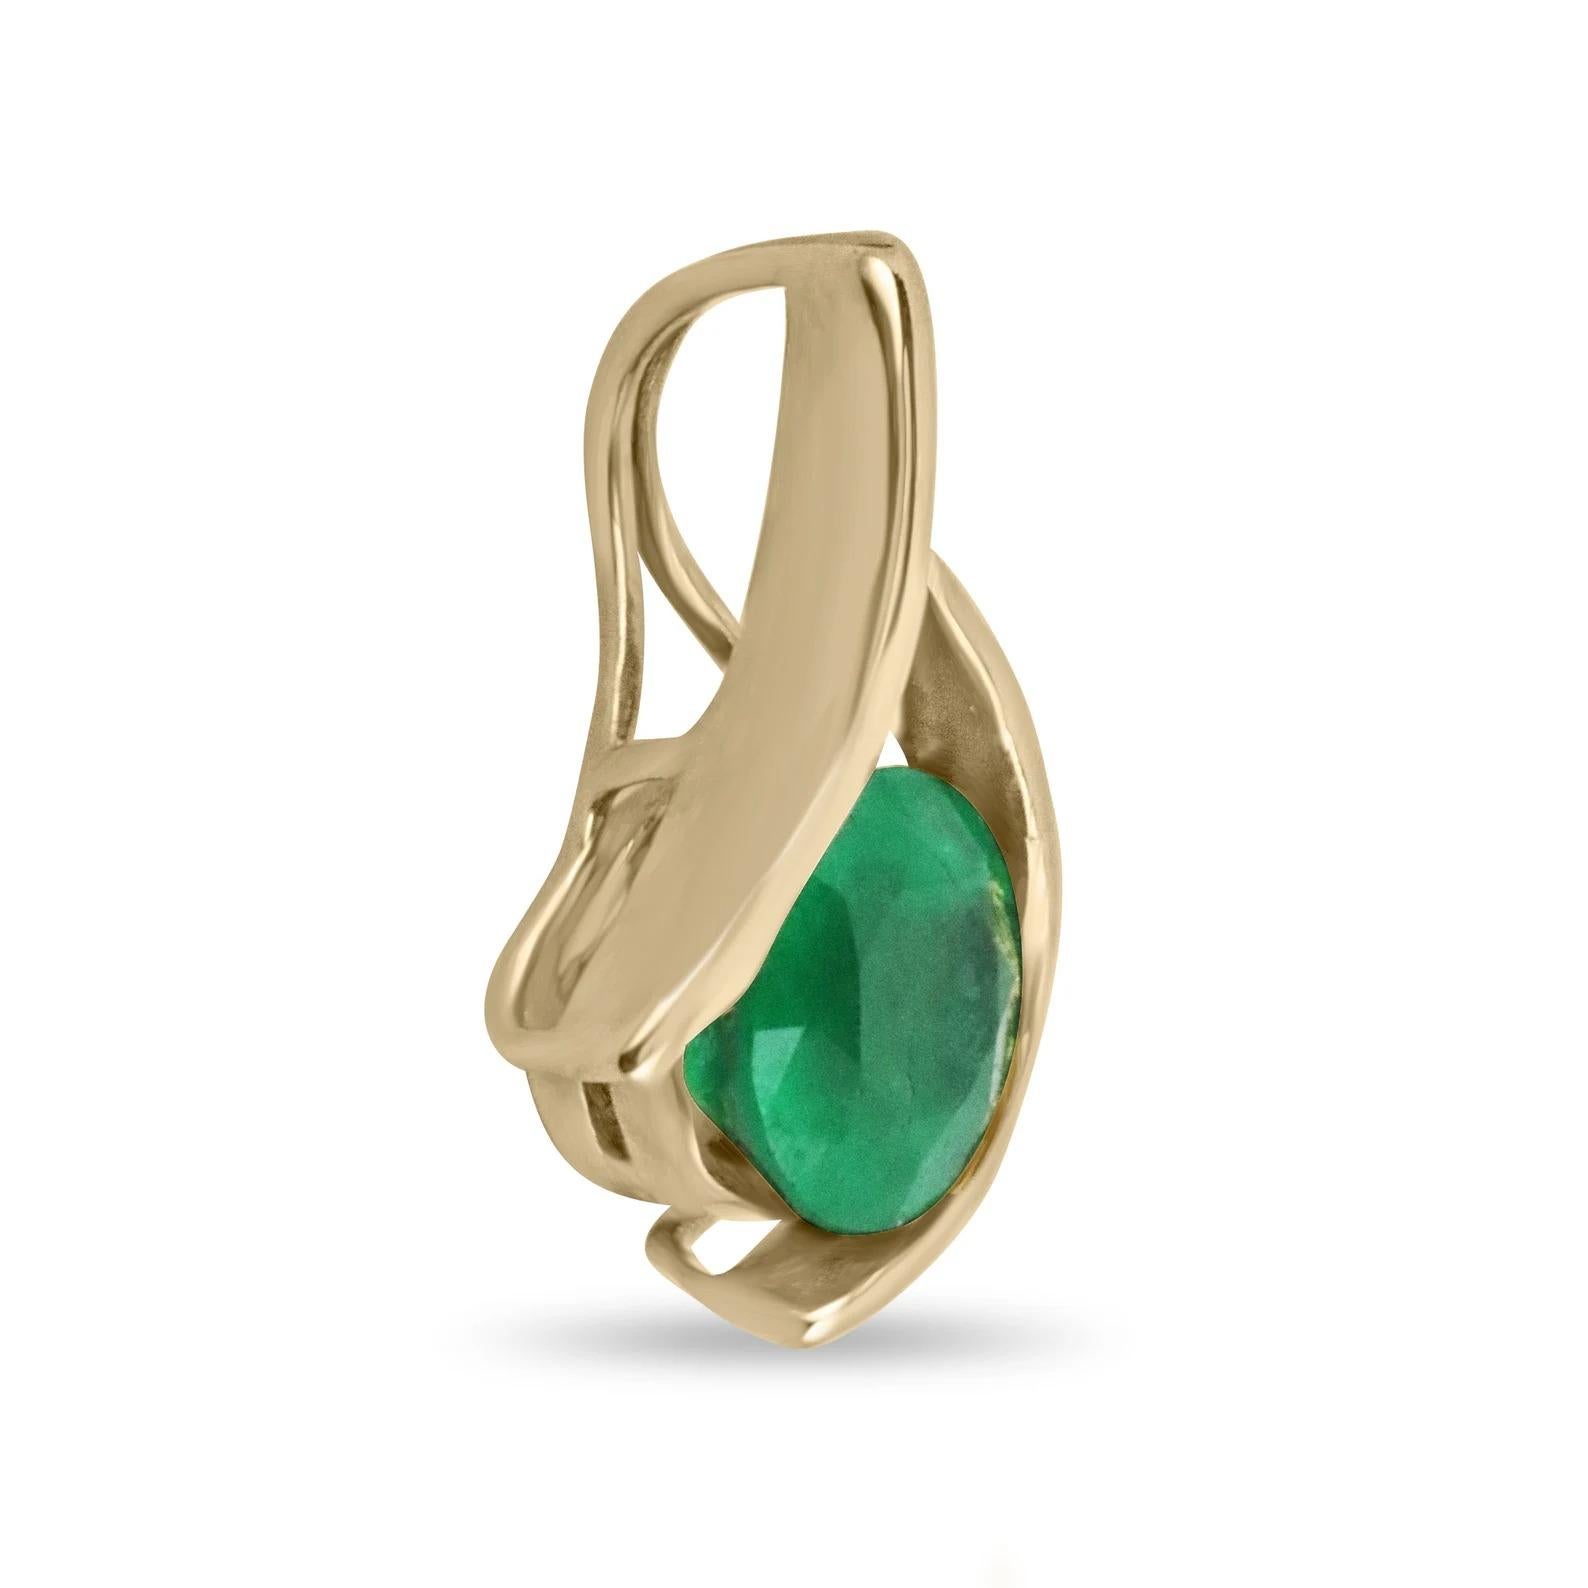 This is a one-of-a-kind emerald pendant. This lovely piece features a solitaire, round-cut Colombian emerald showcasing a vivacious electric green color, along with very good luster. Set in 14K yellow gold.

14K Gold - 18'' cable chain is included